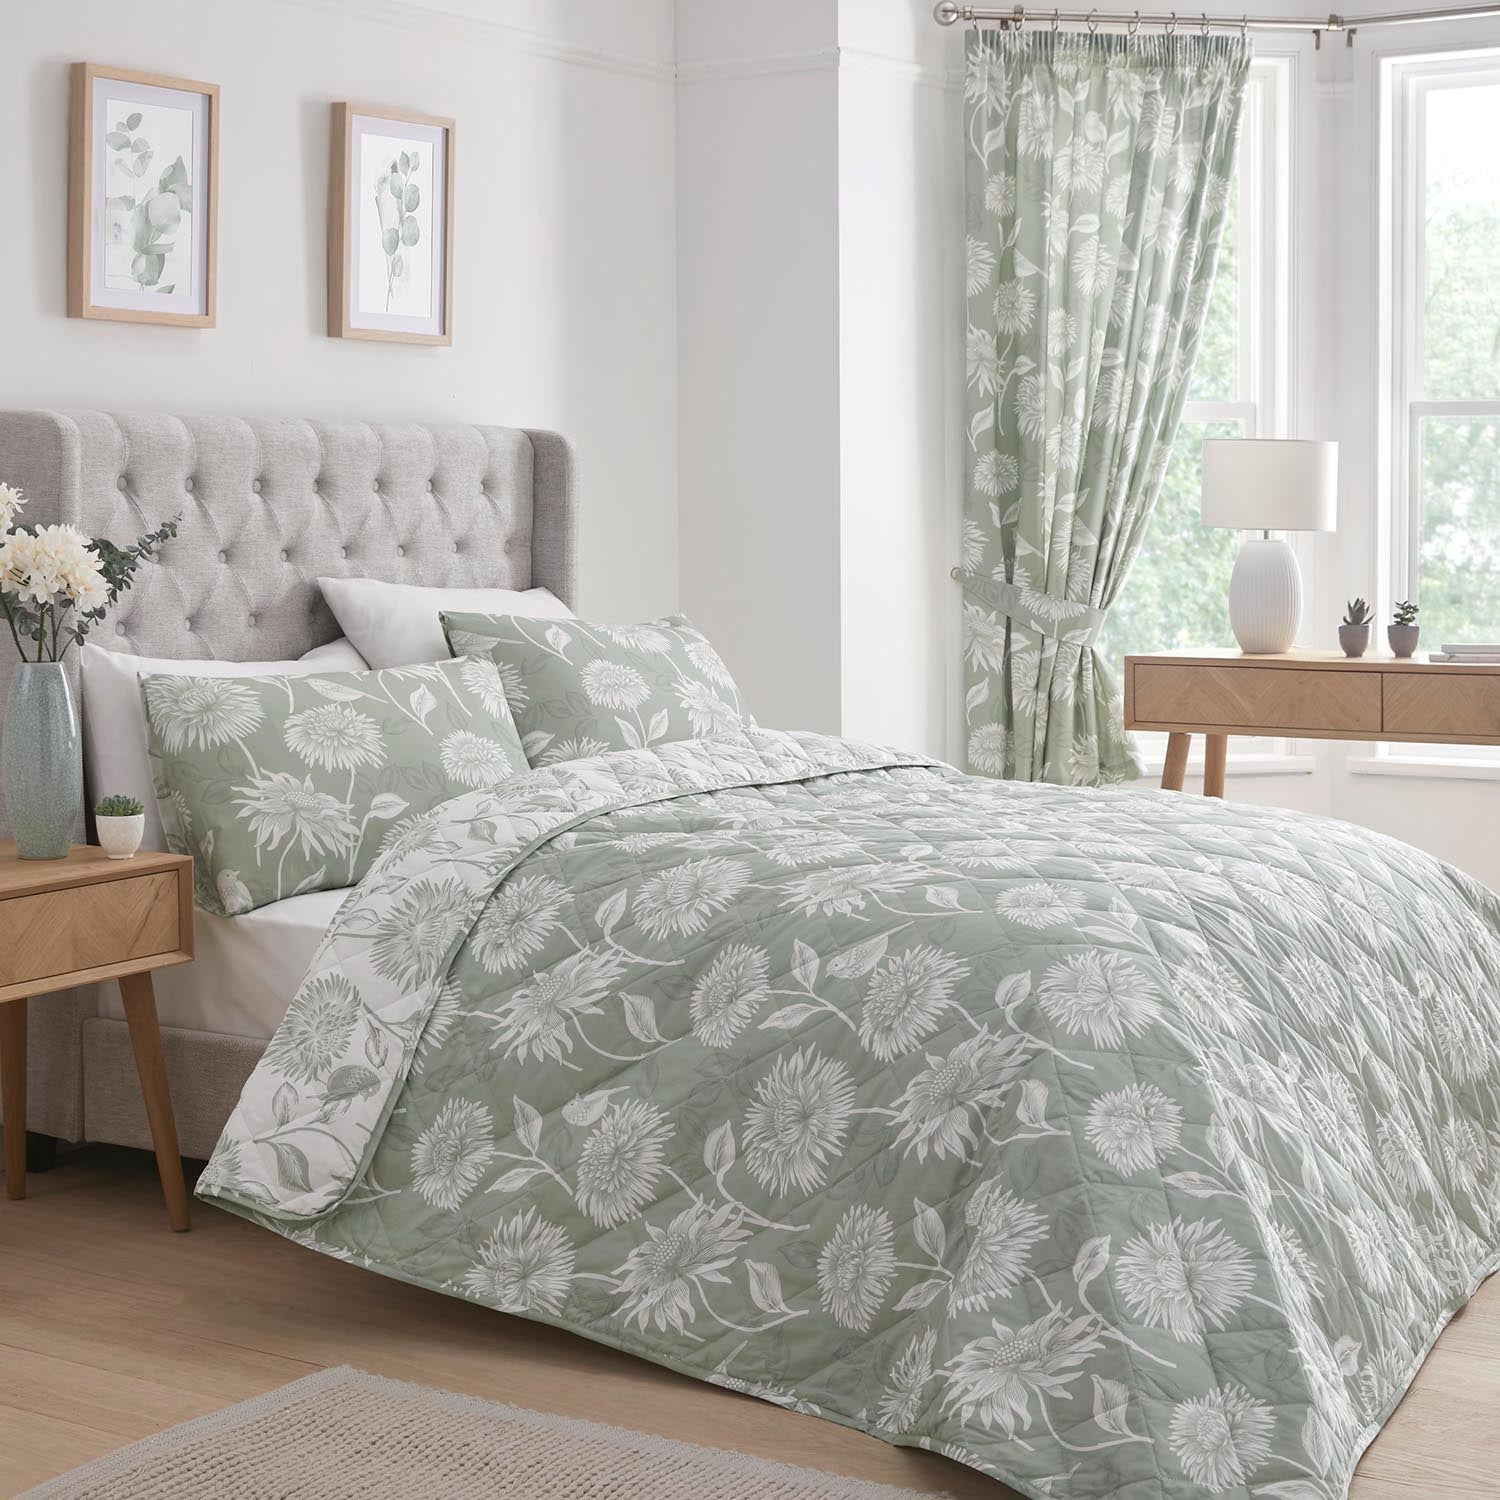 The Home Collection Veronique Teal Bedspread 1 Shaws Department Stores